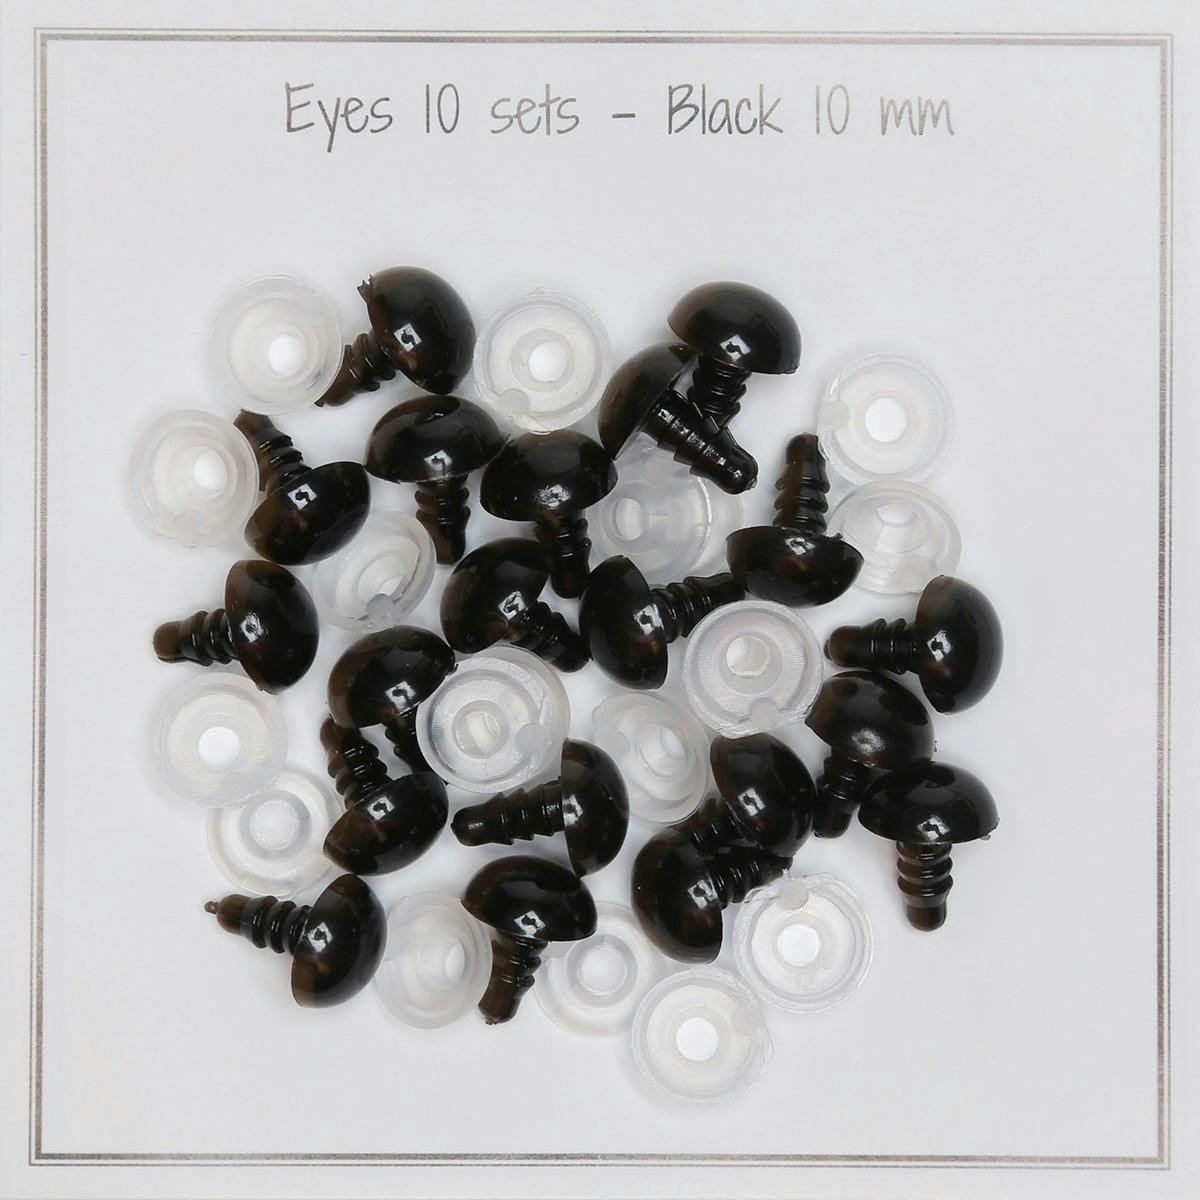 Safety Eyes - 4 mm (0.16 in), Accessories